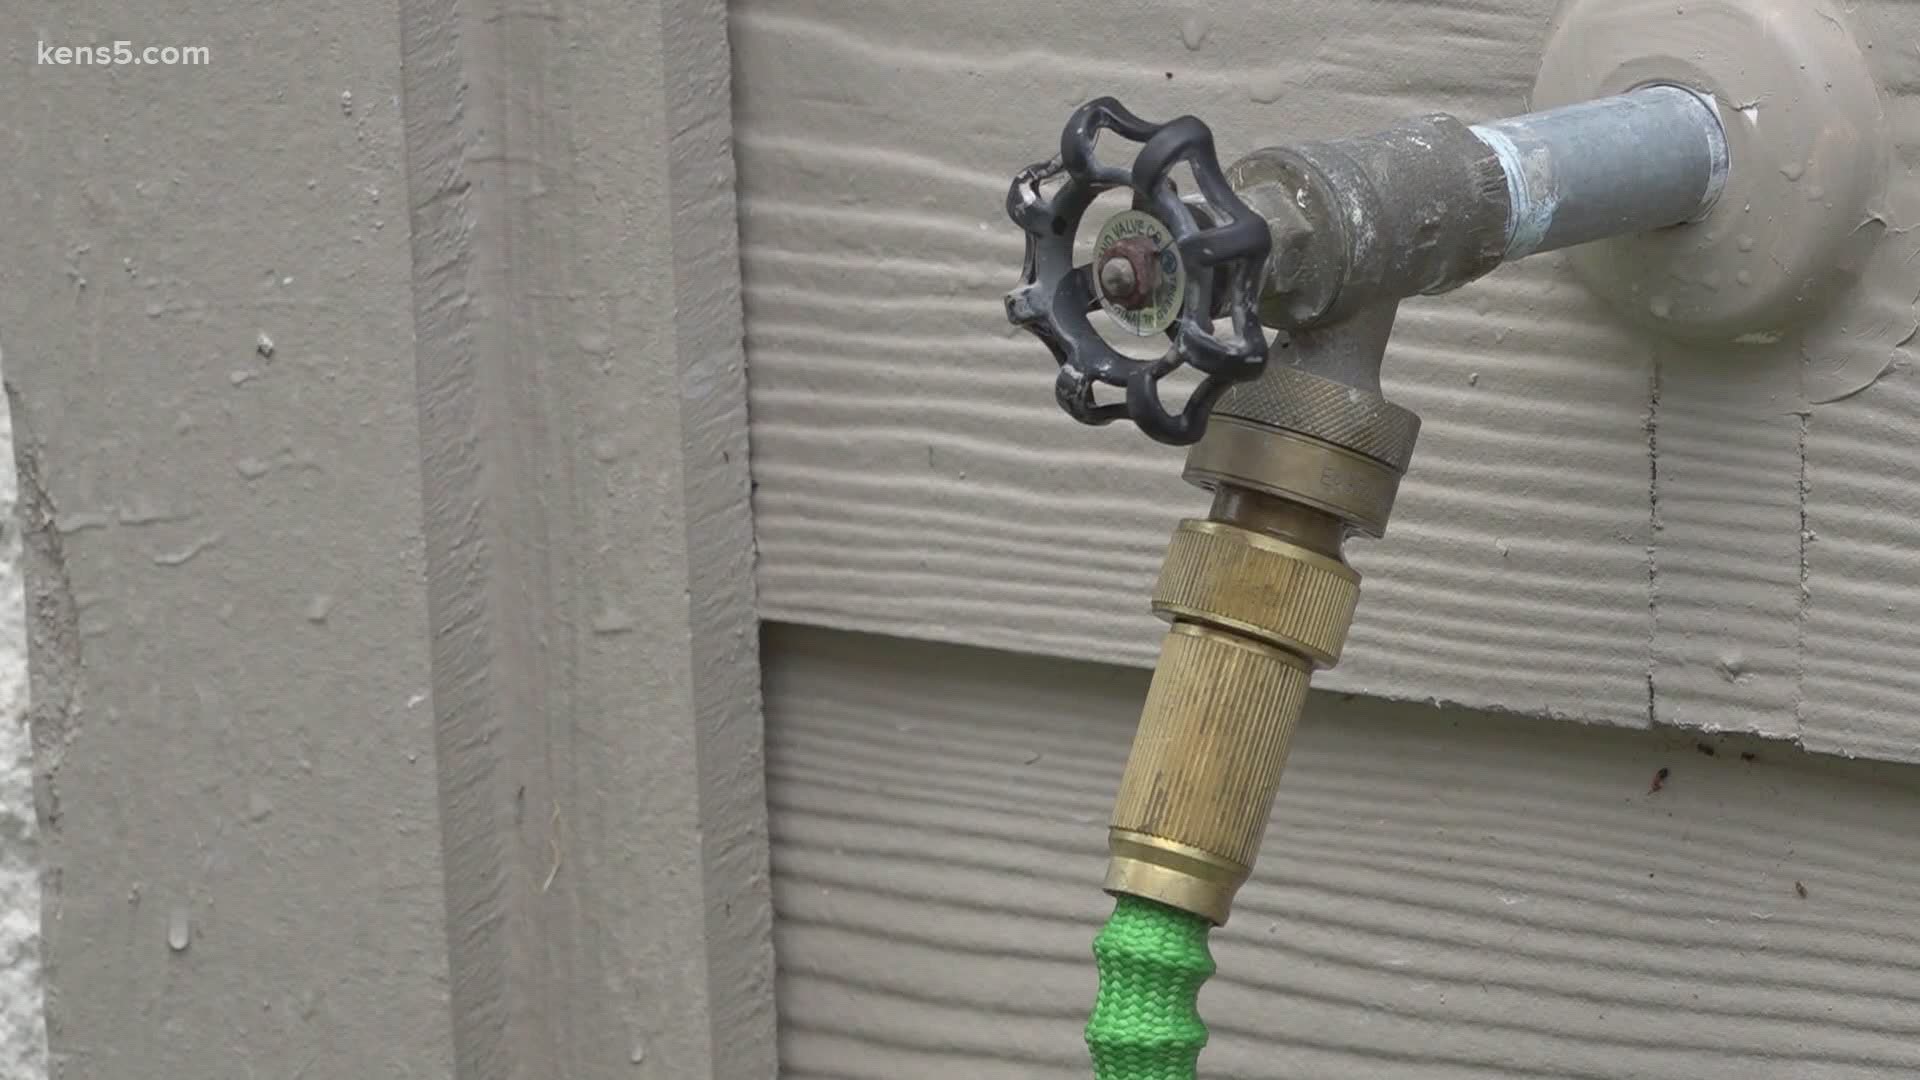 This means outdoor watering with a sprinkler system is only allowed one day a week between 7 p.m. and 11 a.m.